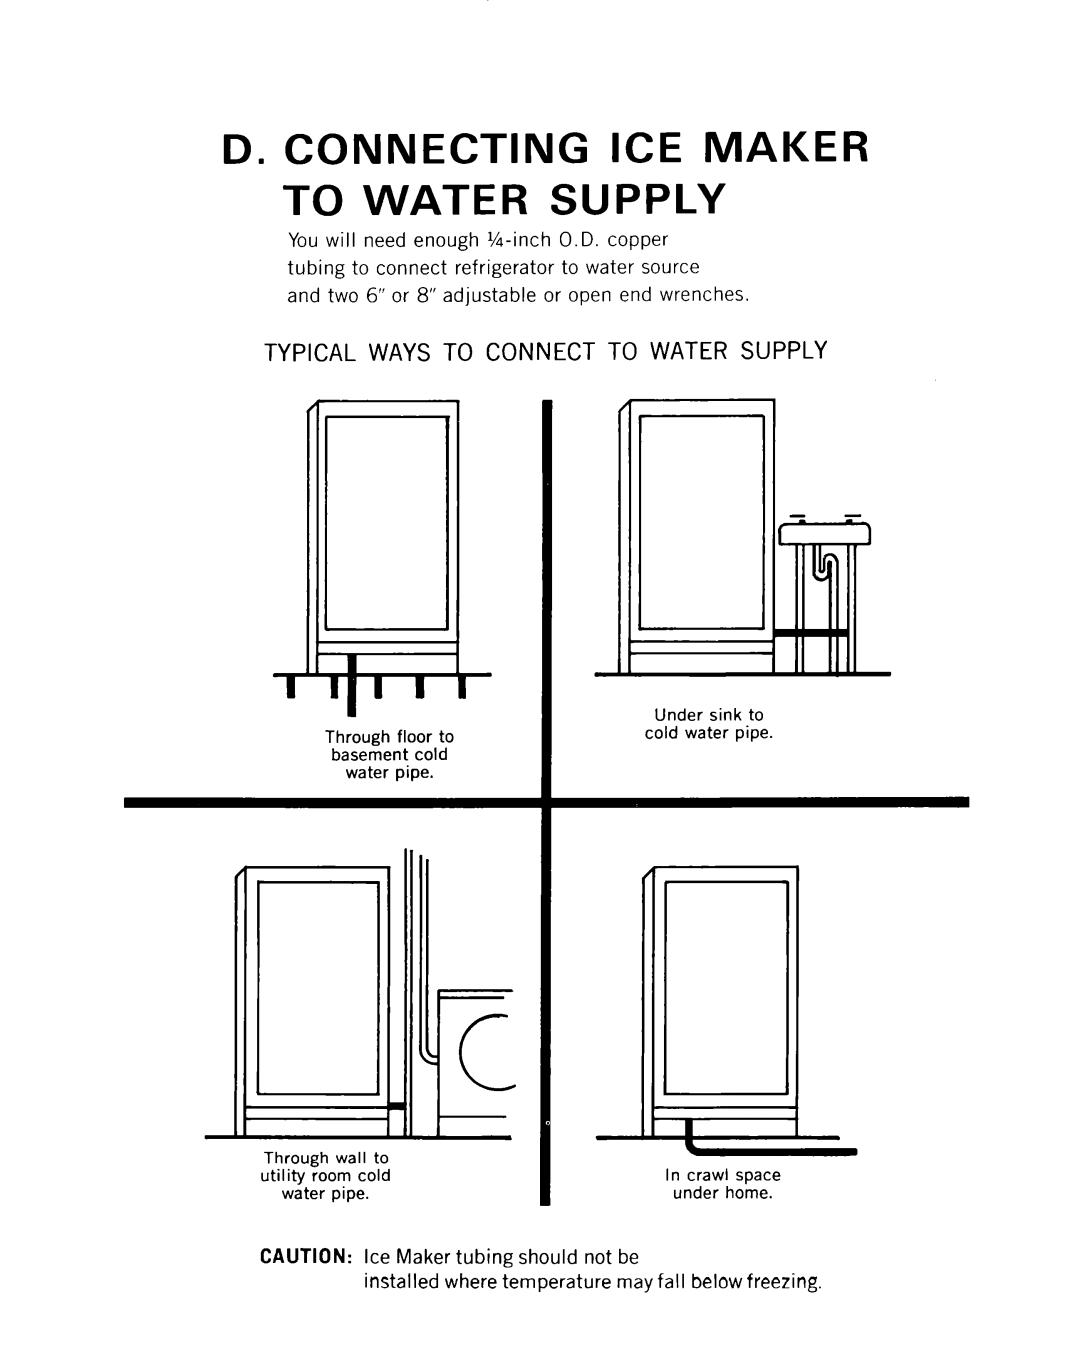 Whirlpool ECKMF-28 manual D. Connecting Ice Maker To Water Supply, Typical Ways To Connect To Water Supply 